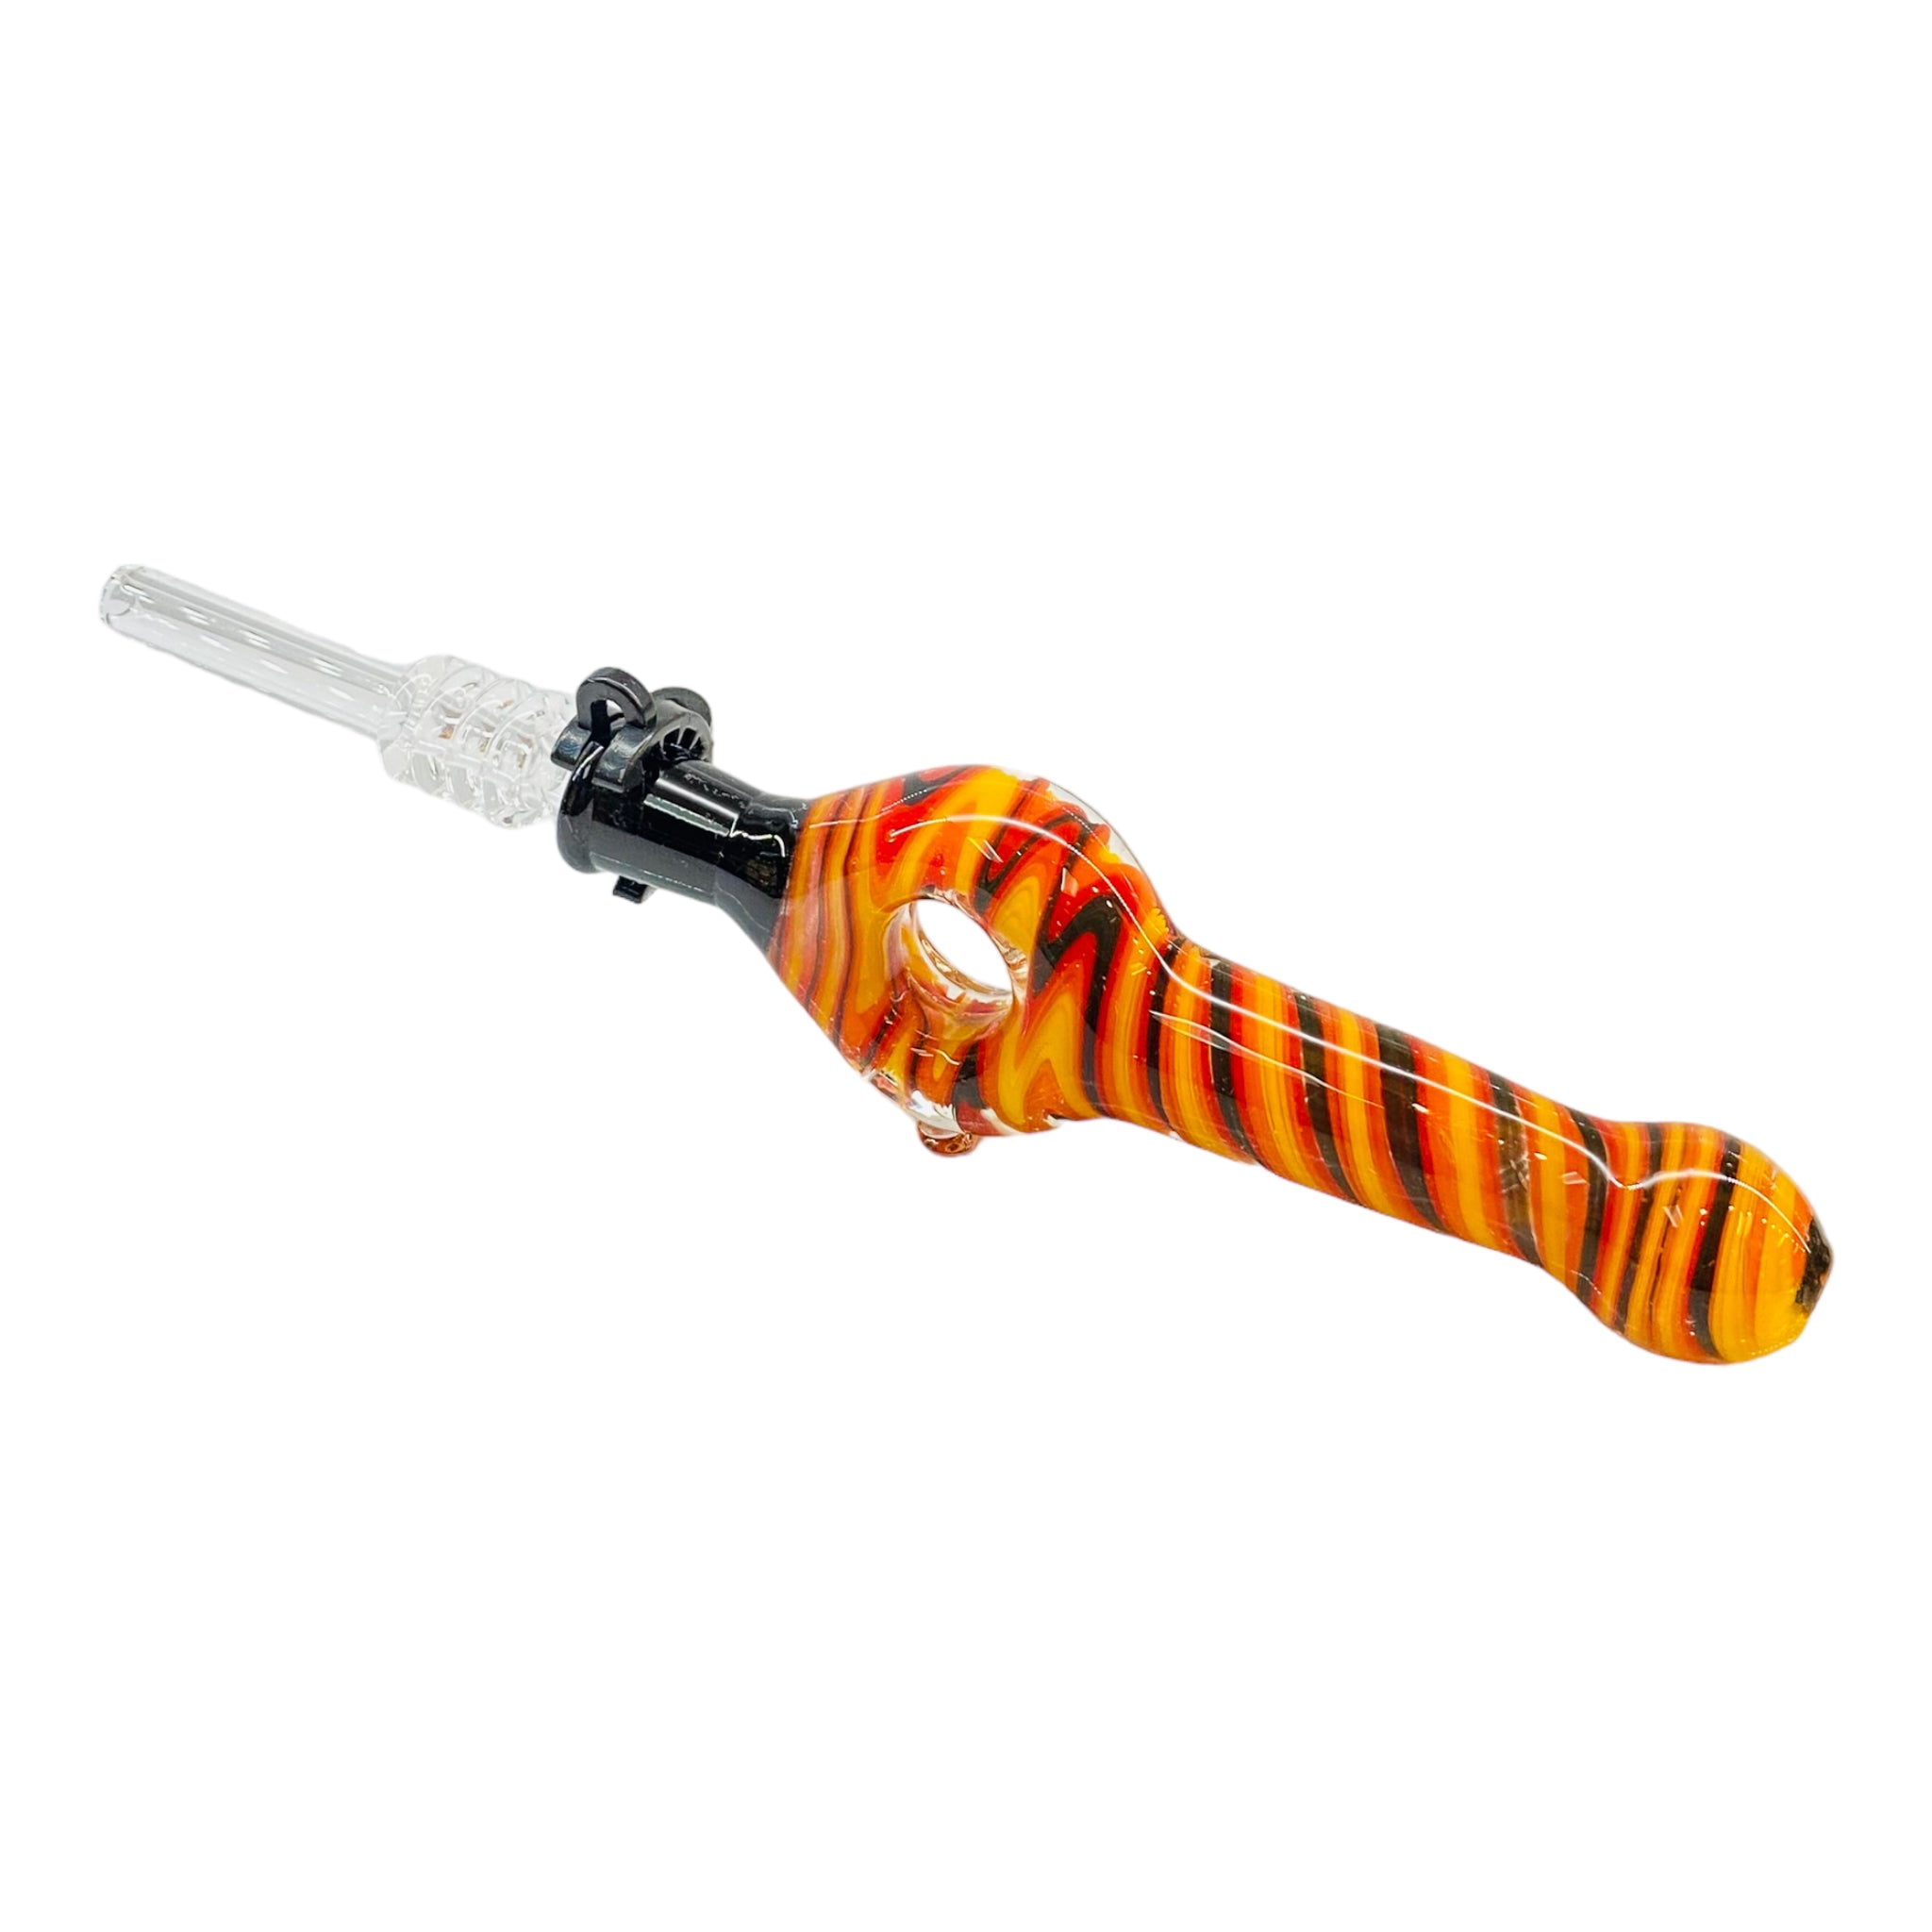 10mm Nectar Collector - Red, Orange, Yellow And Black Wig Wag Spiral Donut With Quartz Tip